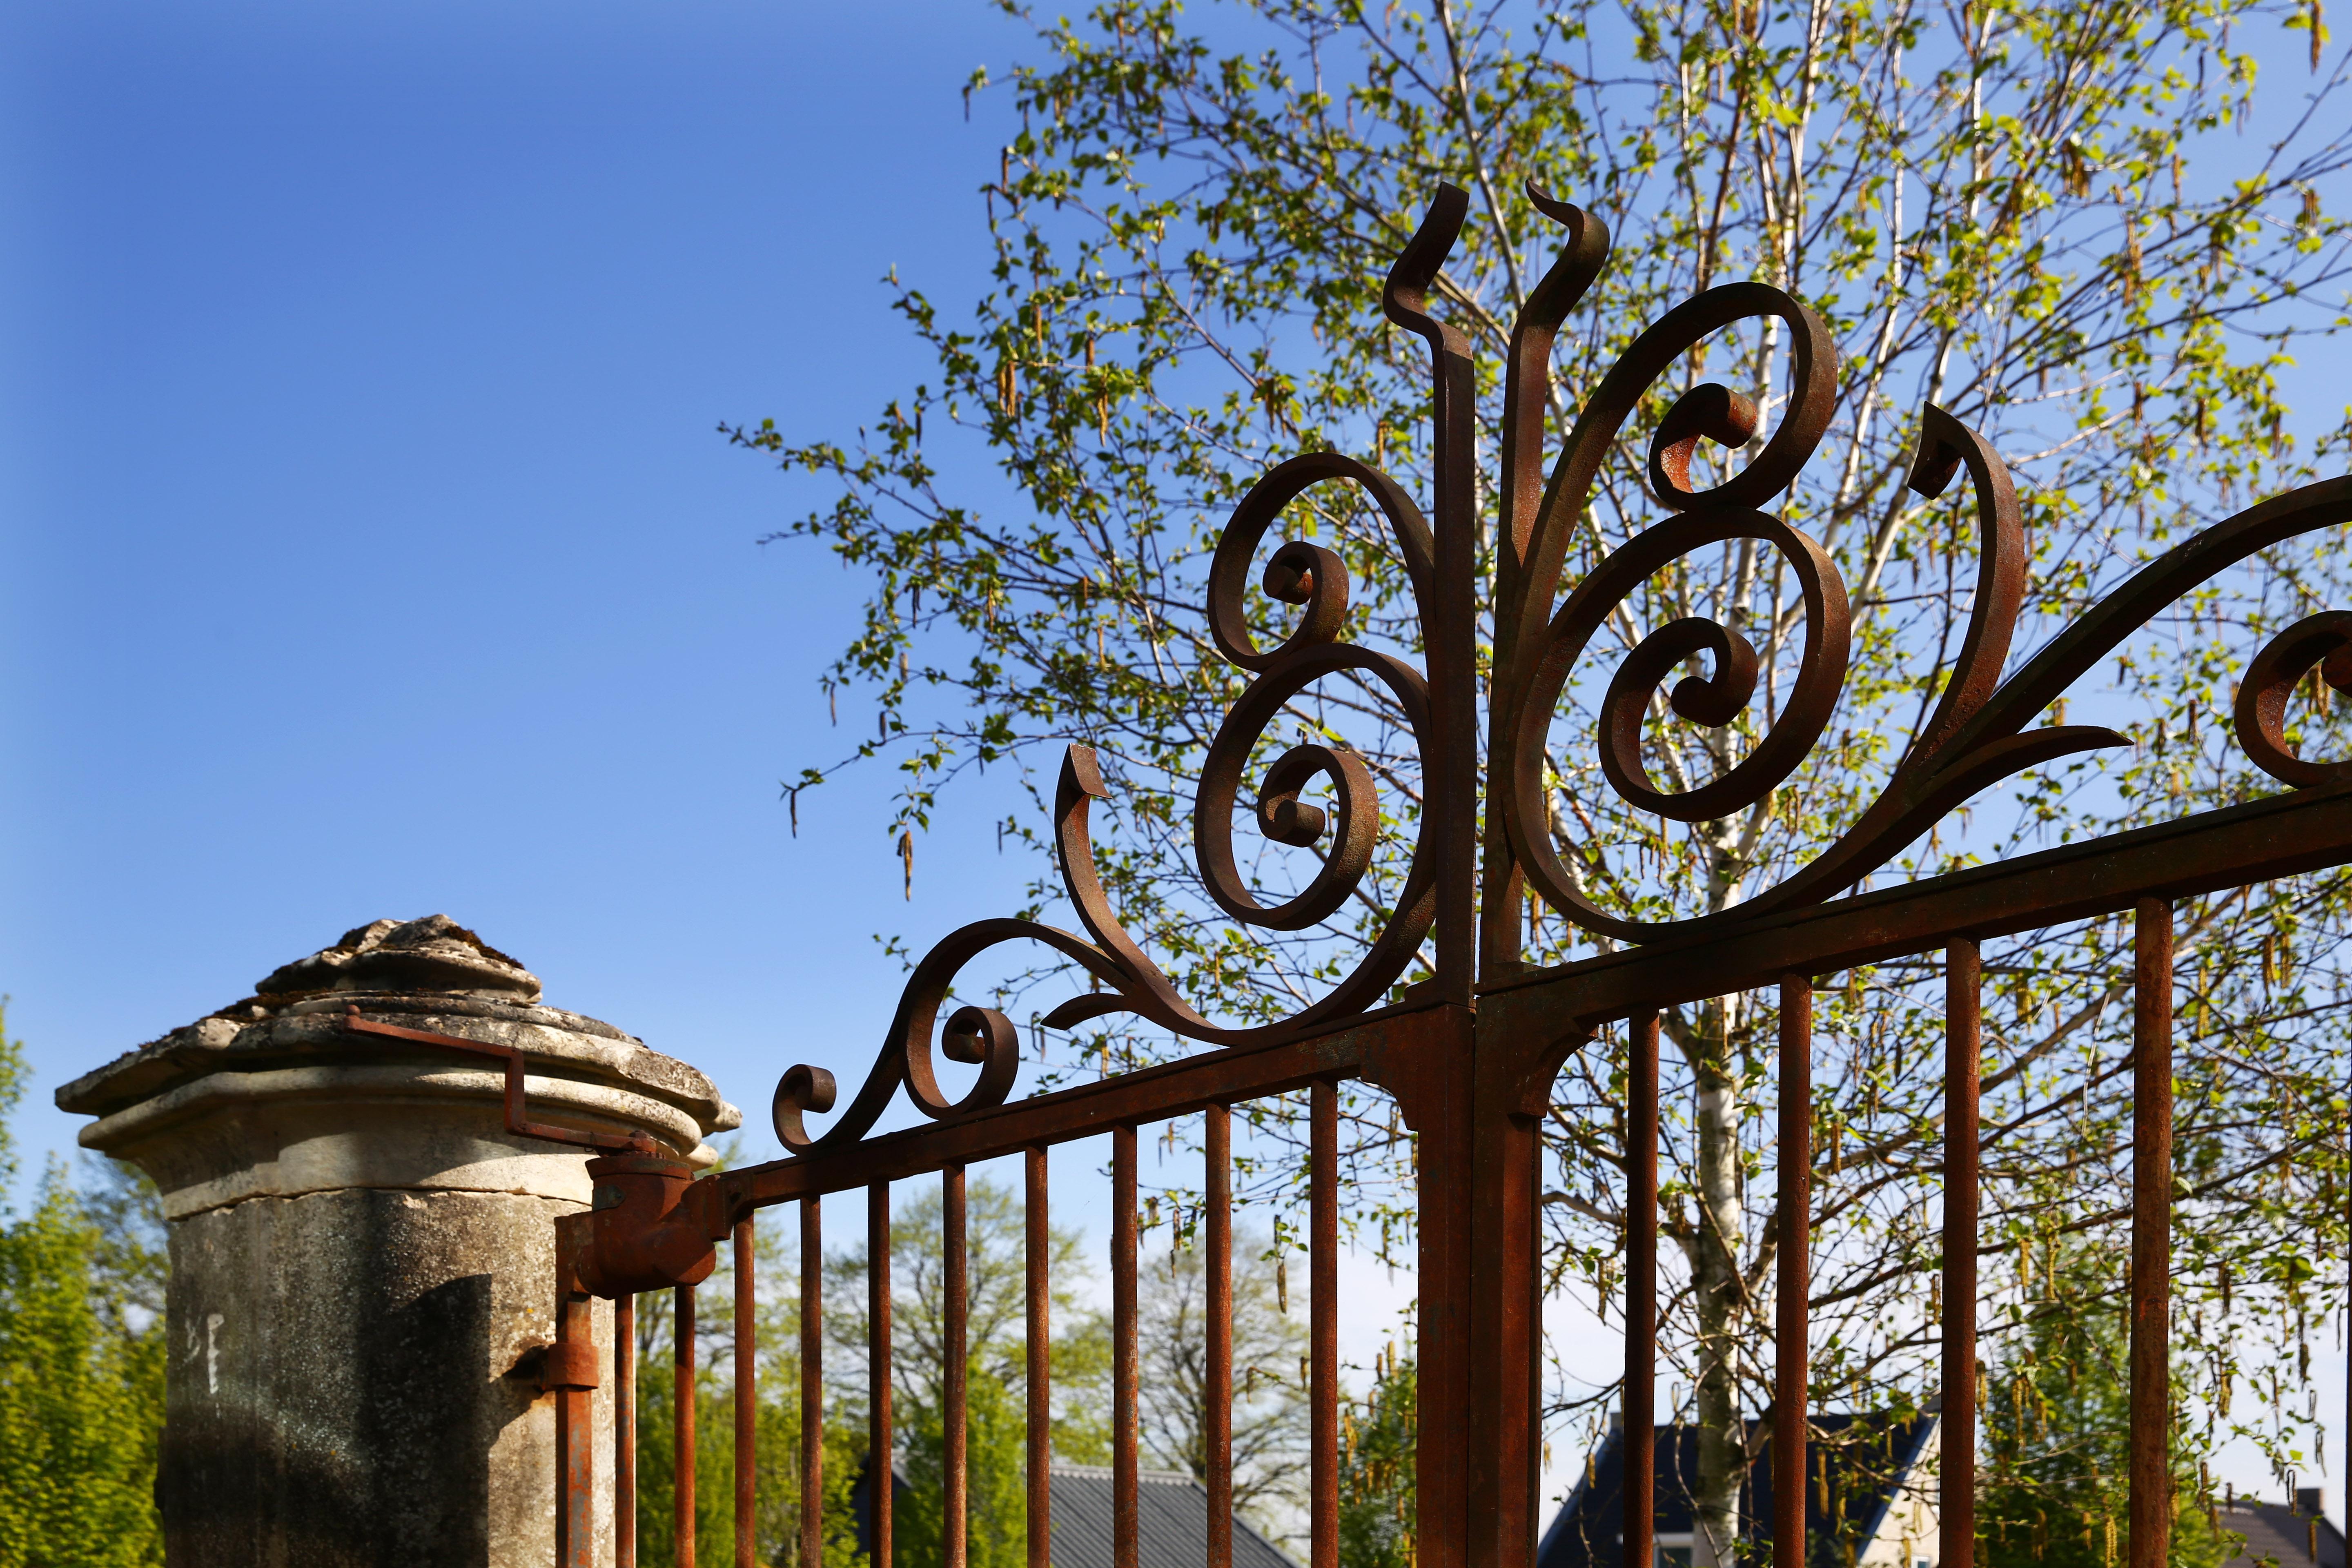 We have a beautiful antique gate with pilasters from the 18th century in our range! The cast iron gate is elegant and in Baroque style. The combination of the French limestone pilasters with the cast iron gate is robust and stately and provides